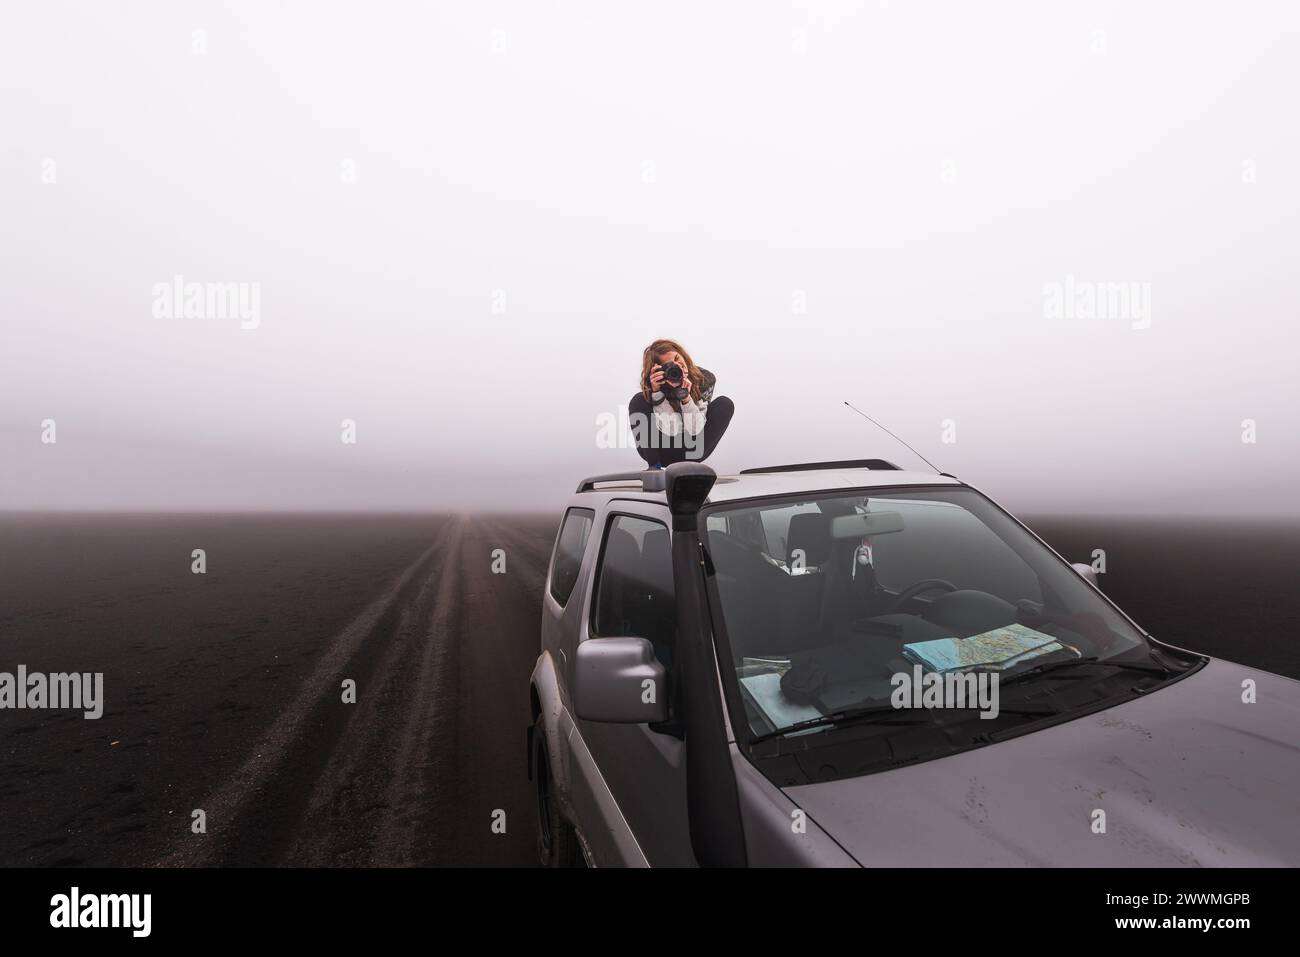 Woman standing on roof of car while taking pictures highlands iceland Stock Photo